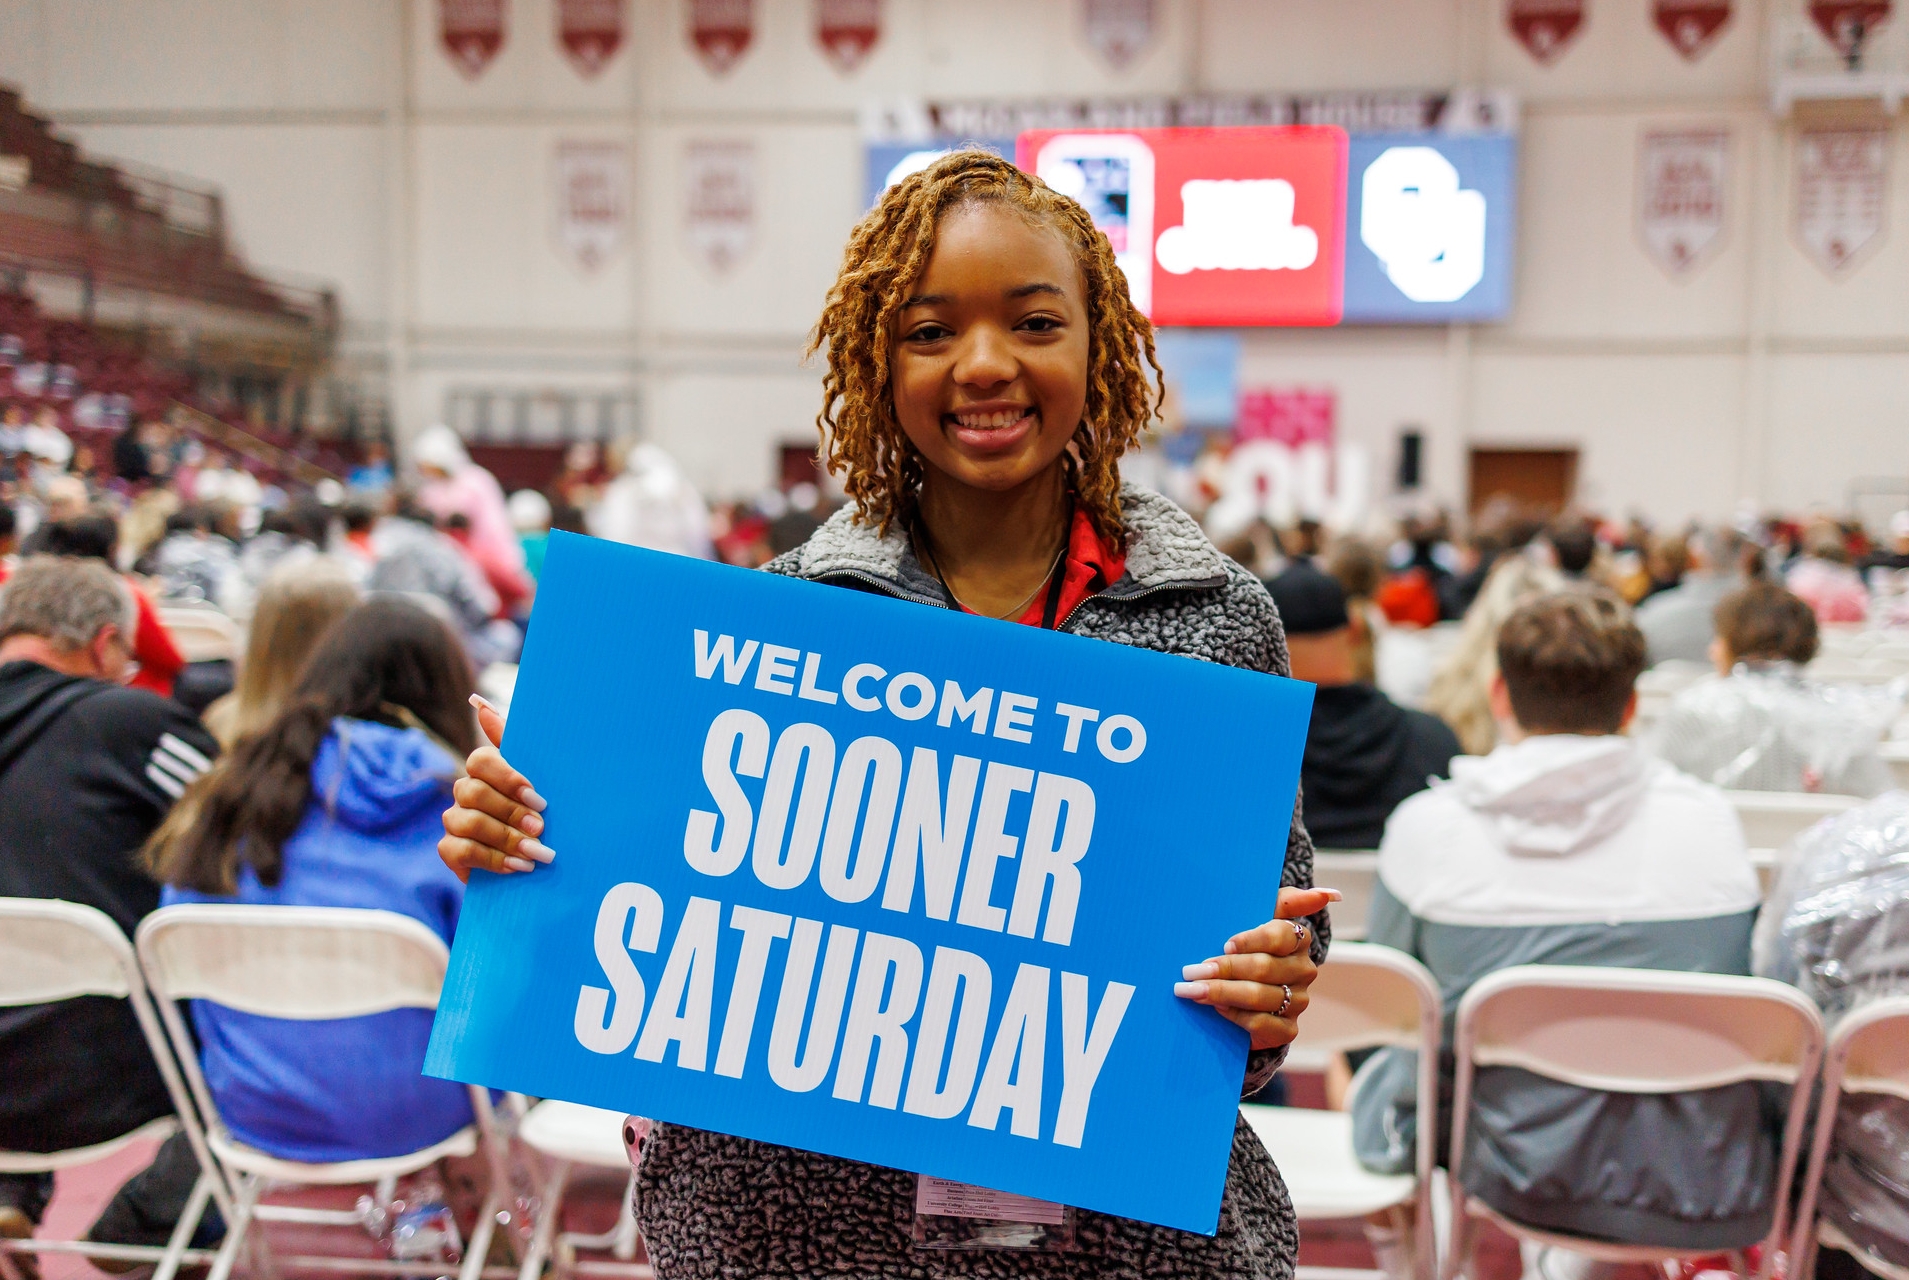 Student holding a "Welcome to Sooner Saturday" sign 